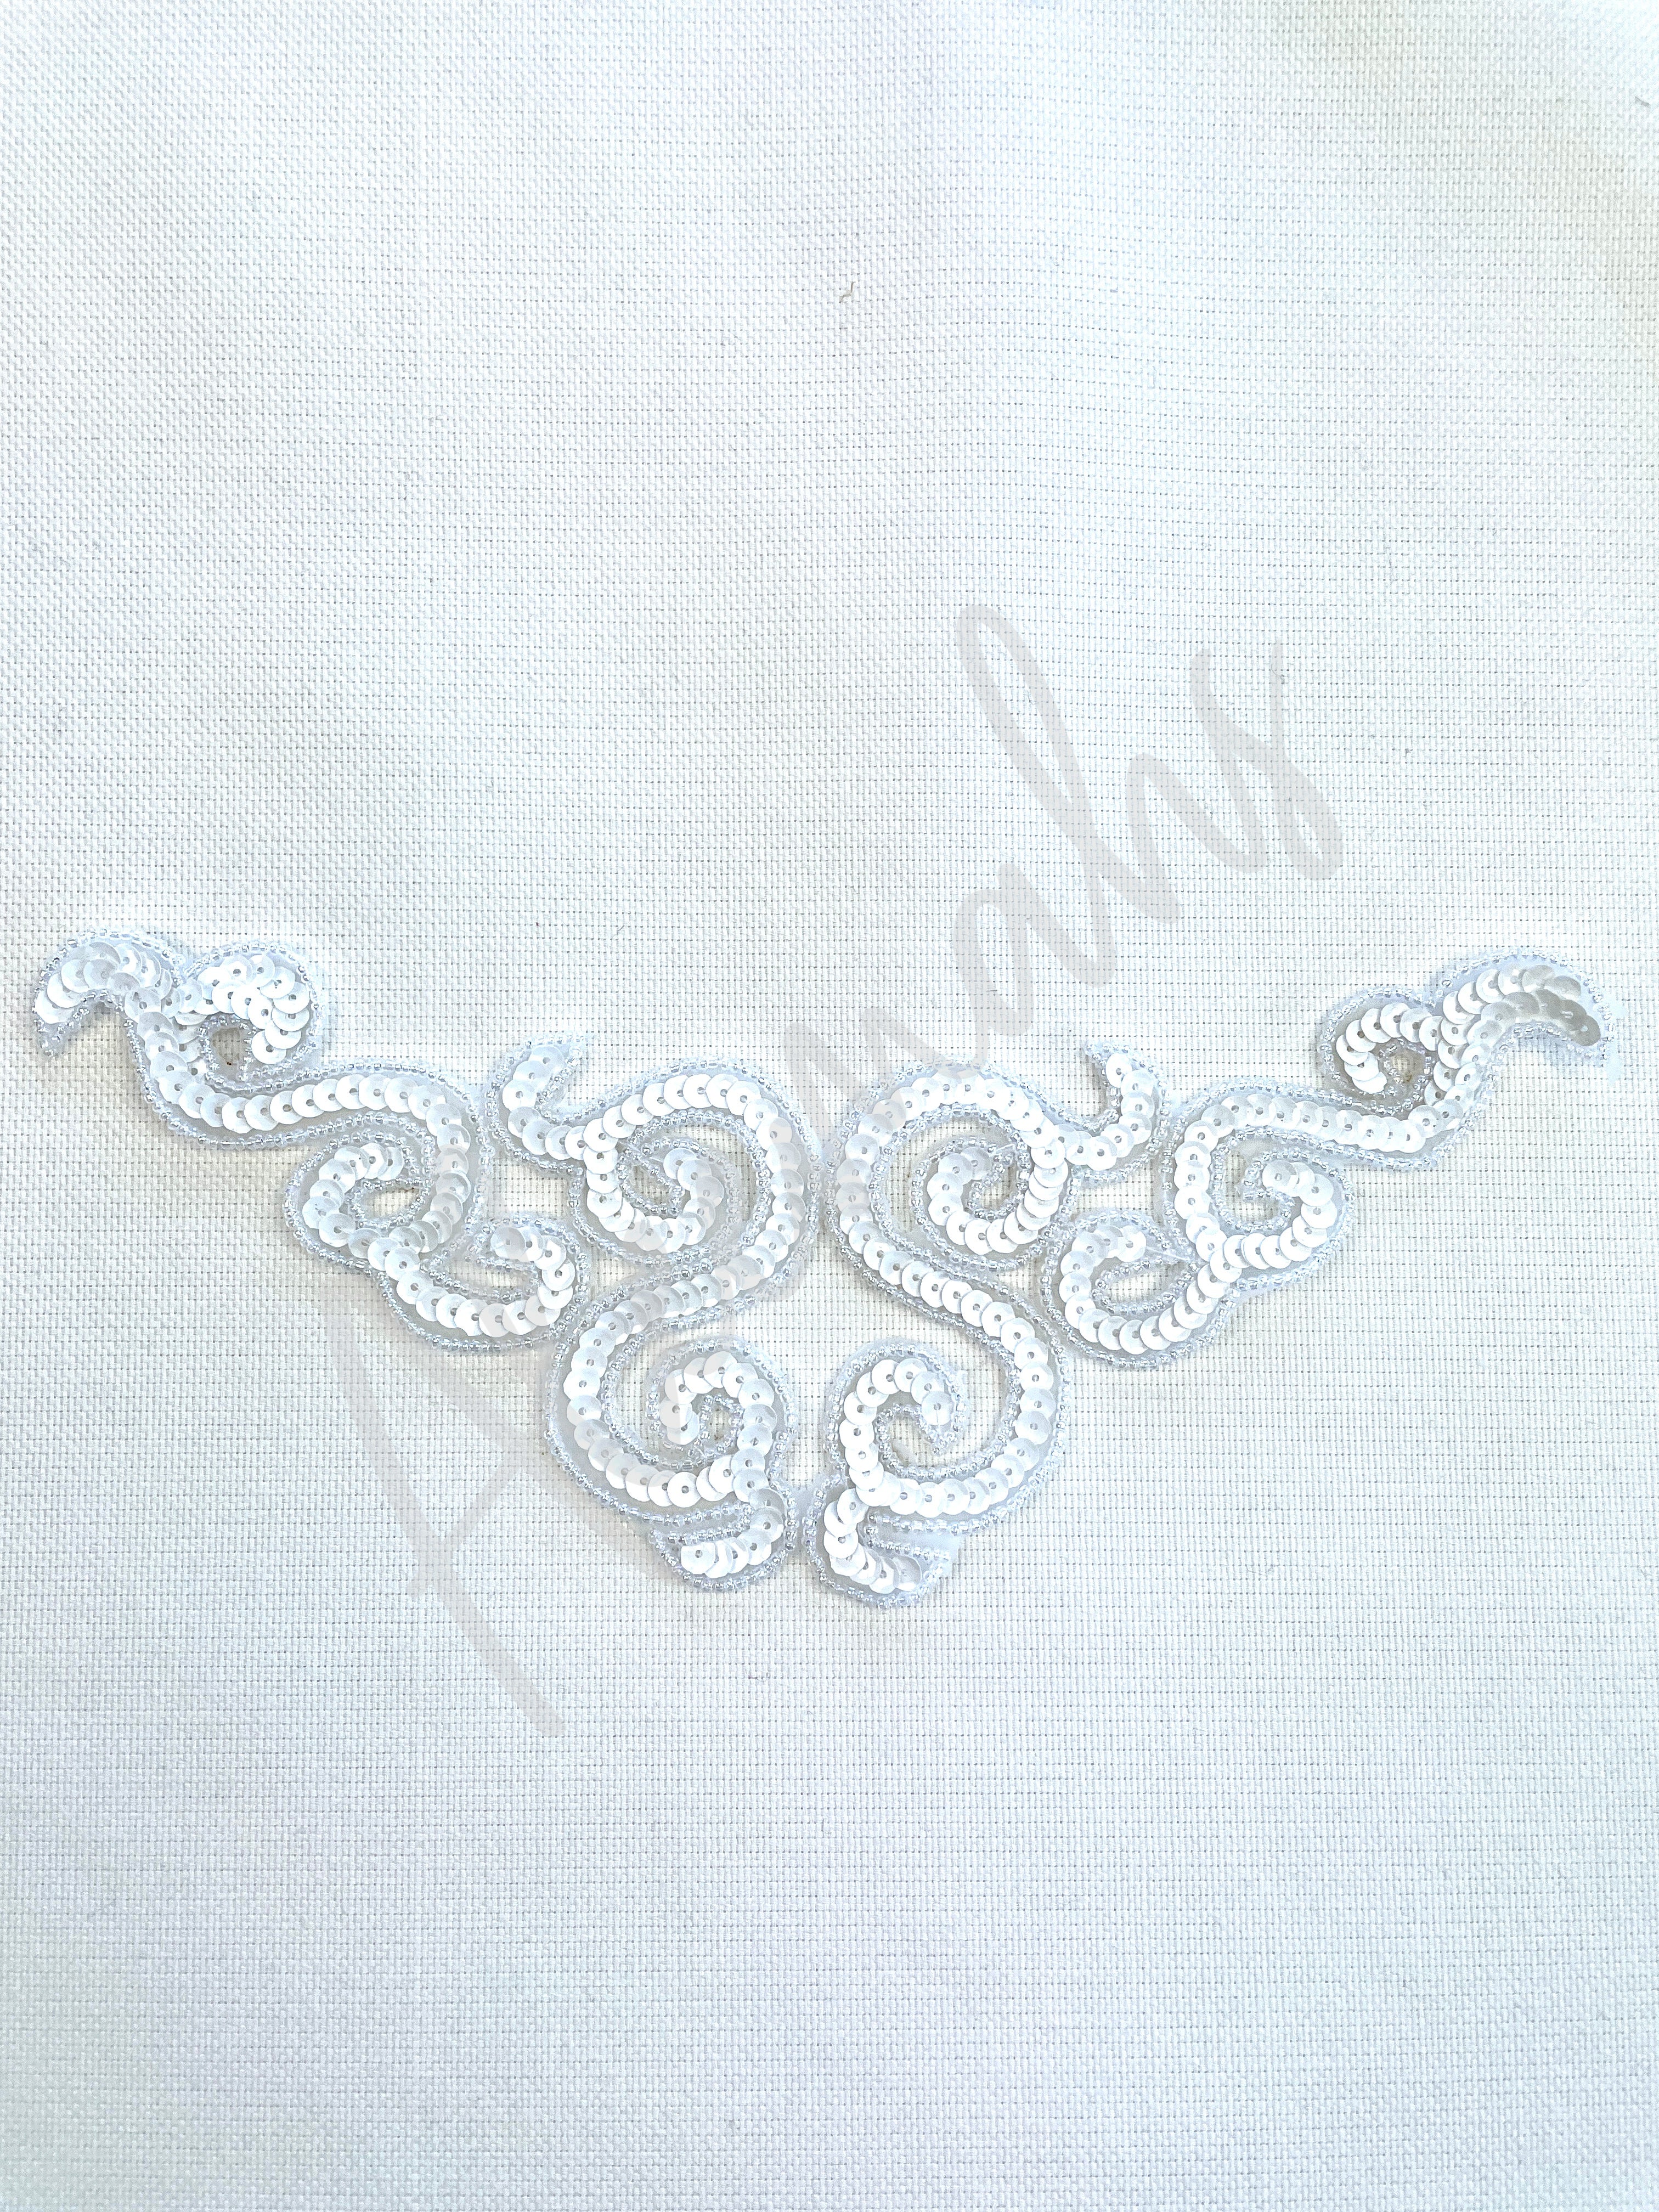 A-107: White sequin and bead applique